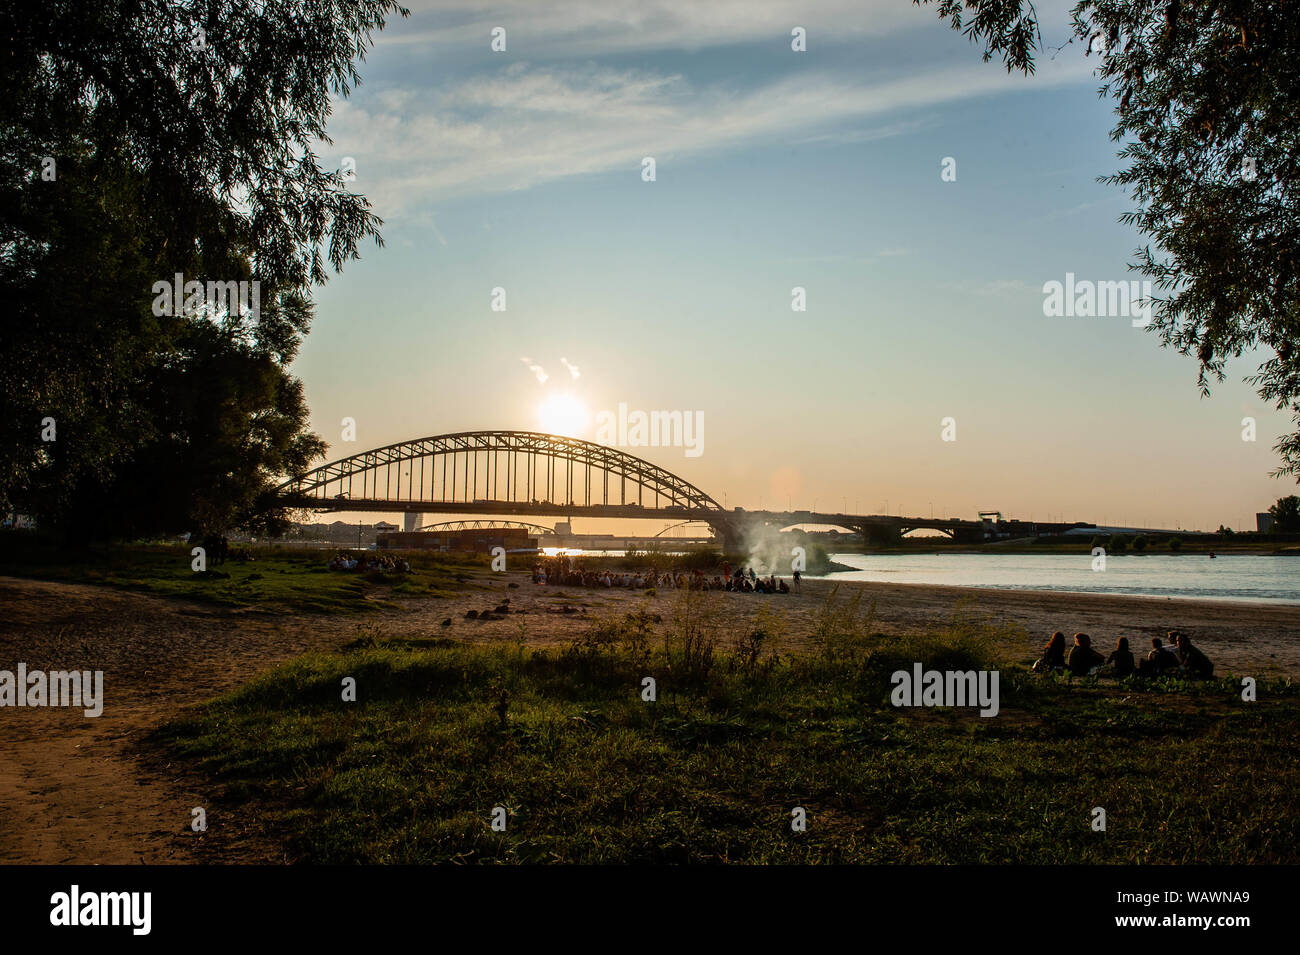 Nijmegen, Gelderland, Netherlands. 21st Aug, 2019. View of the Waalbrug bridge during sunset.The Ooijpolder is a beautiful area for walking and recreation close to the Waalbrug Bridge and surrounded by the Waal River. The area is located east of the city of Nijmegen in the province of Gelderland. Credit: Ana Fernandez/SOPA Images/ZUMA Wire/Alamy Live News Stock Photo